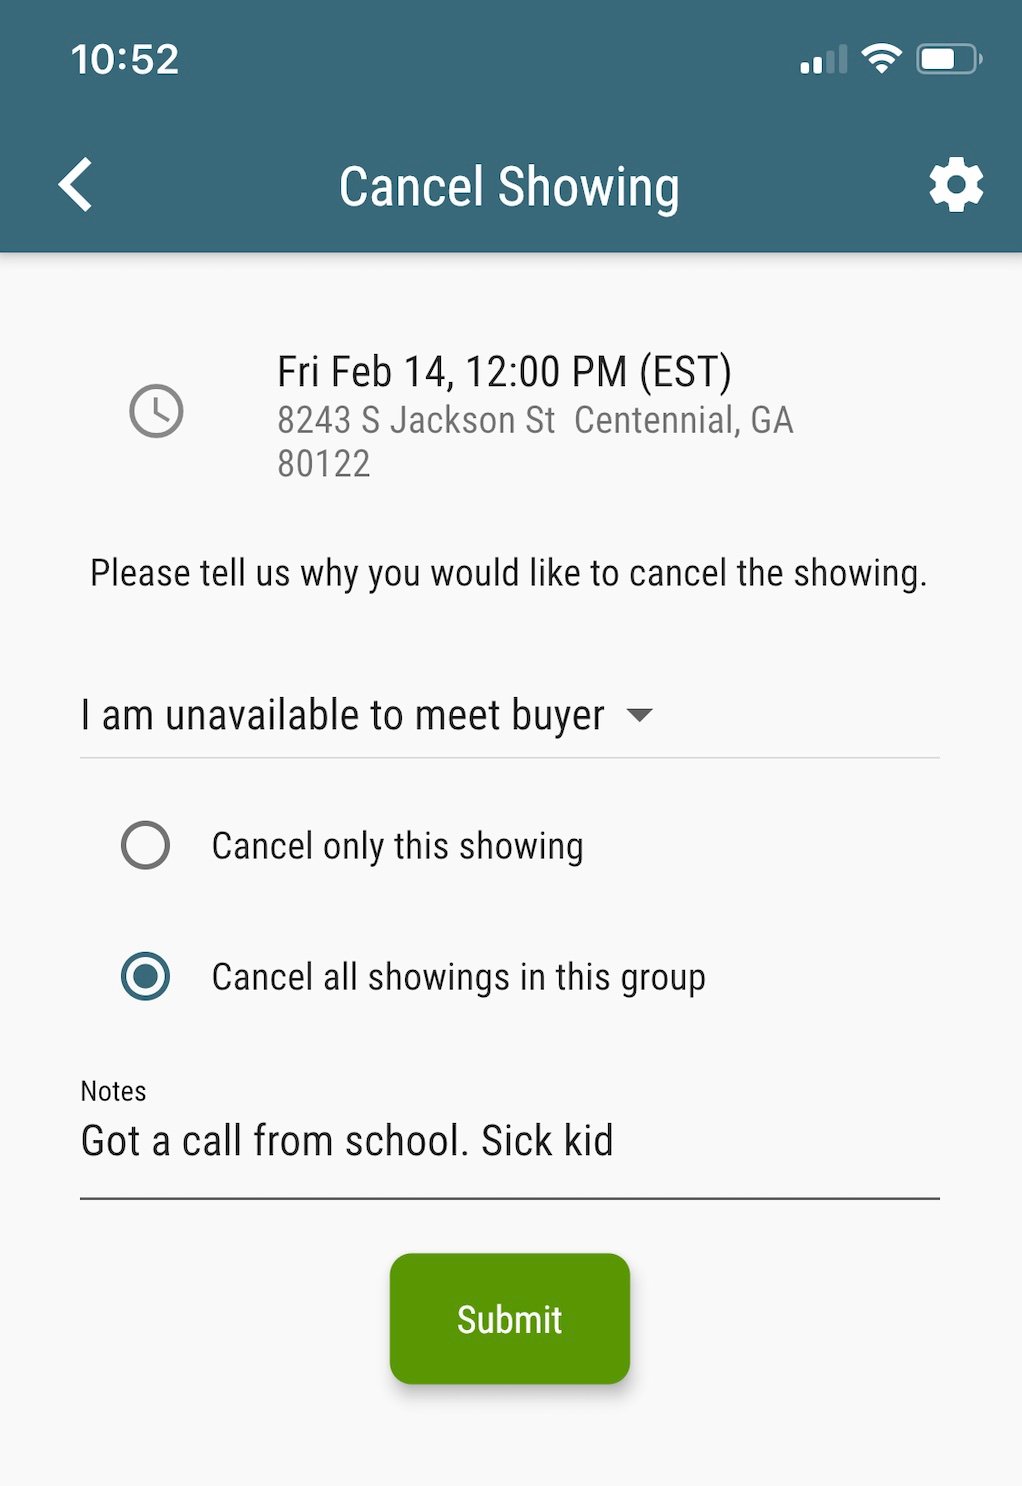 Cancel a group of showing requests in Showami